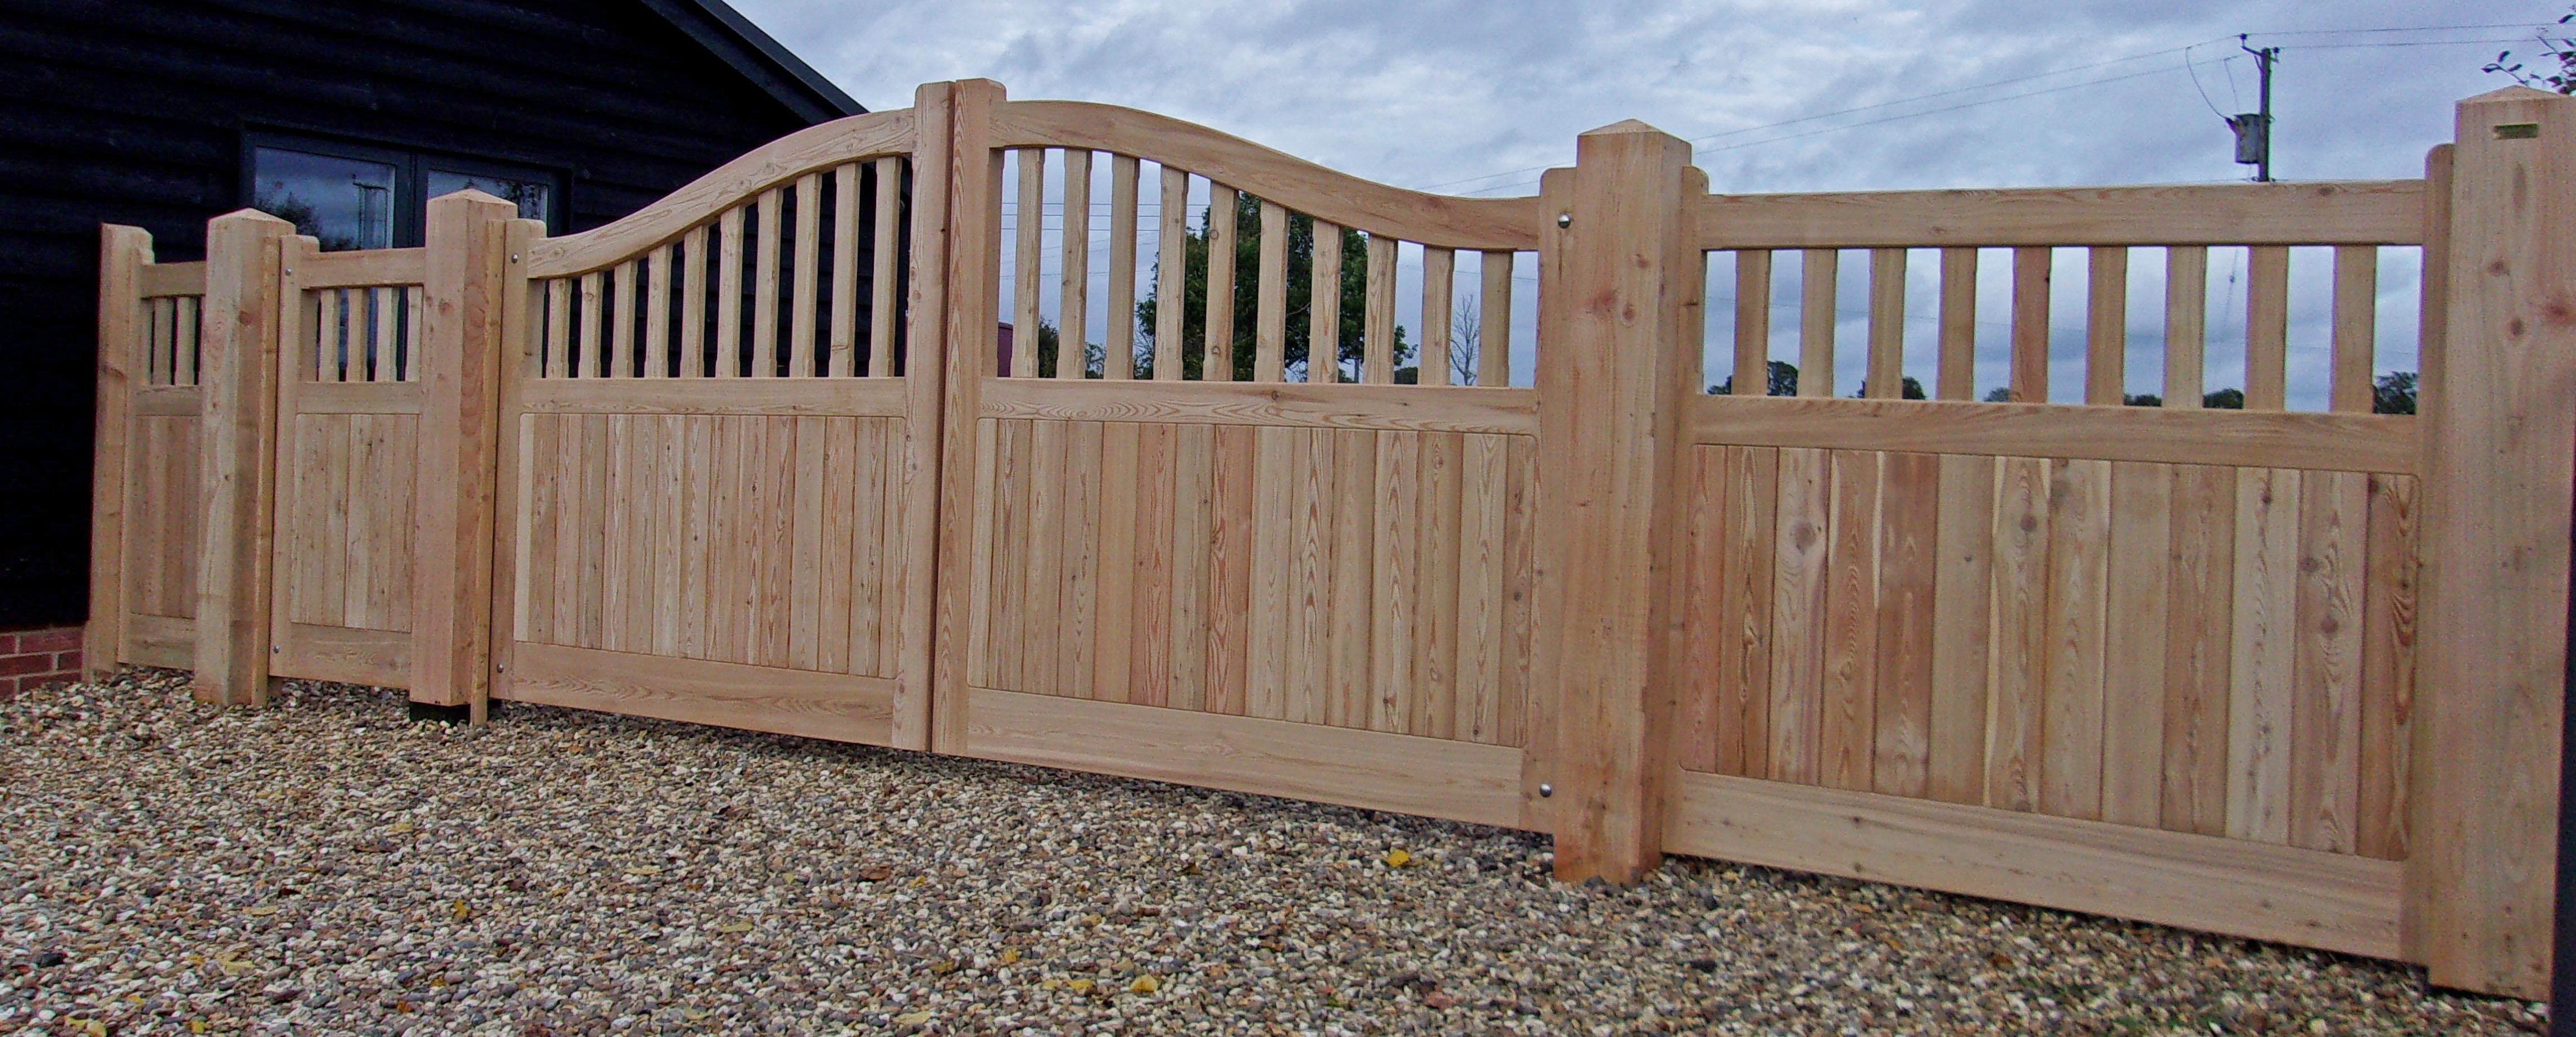 Newmarket gates, with Aldebugh Pedestrian gate and 2 side panels